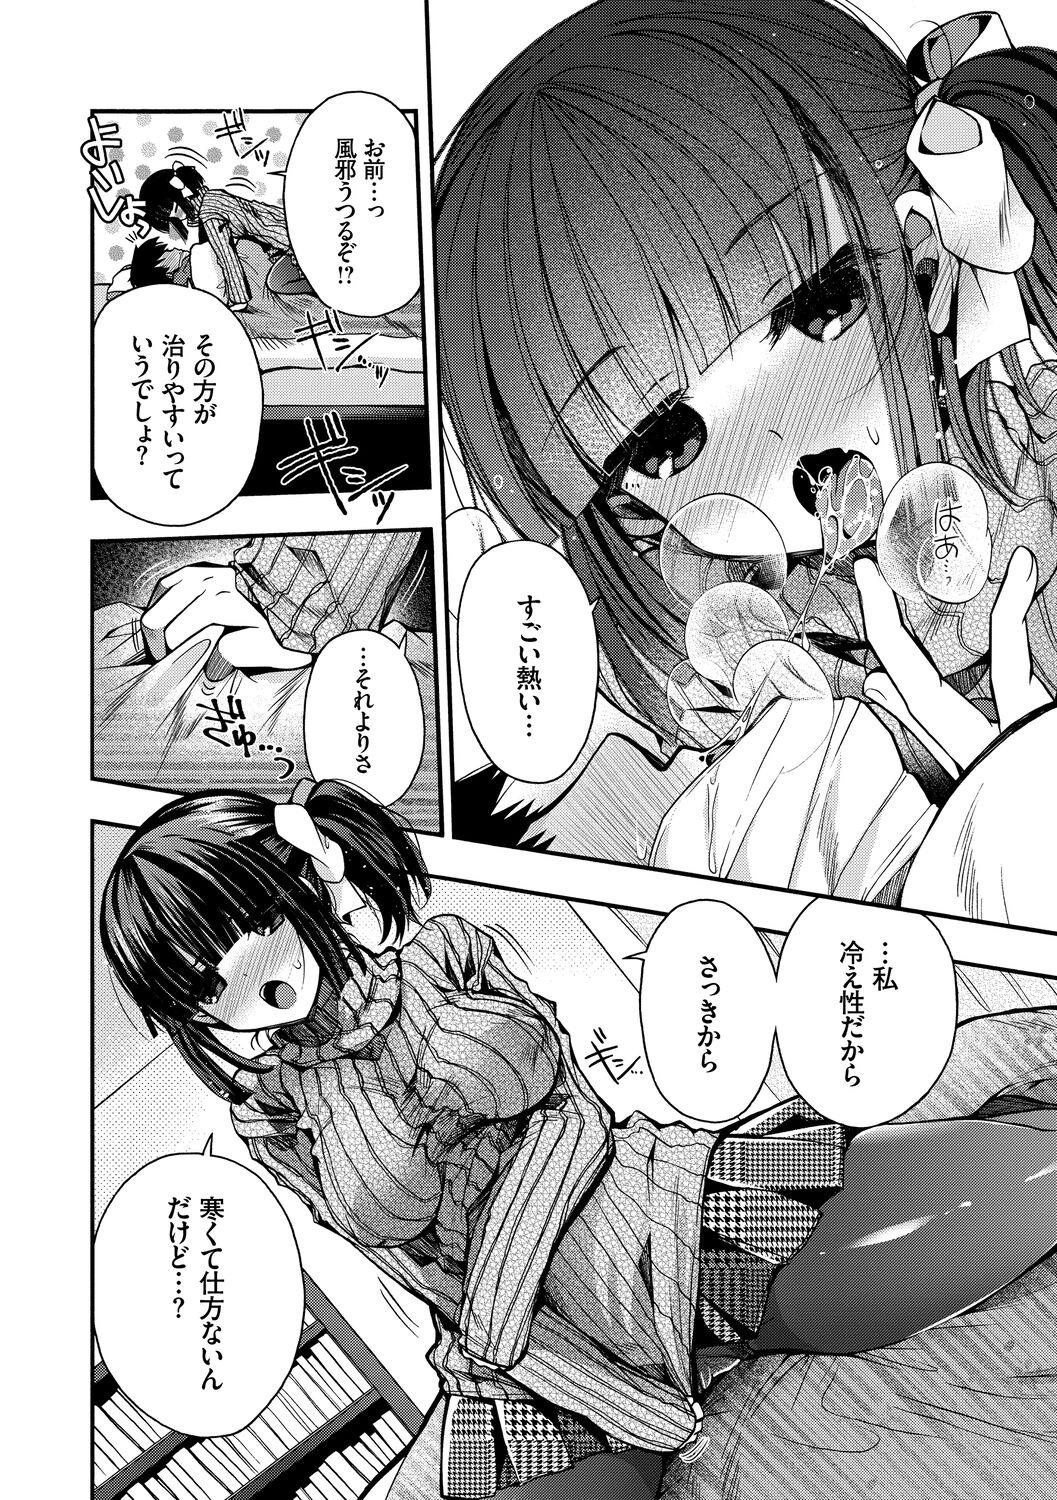 Hatsukoi Melty - Melty First Love 159